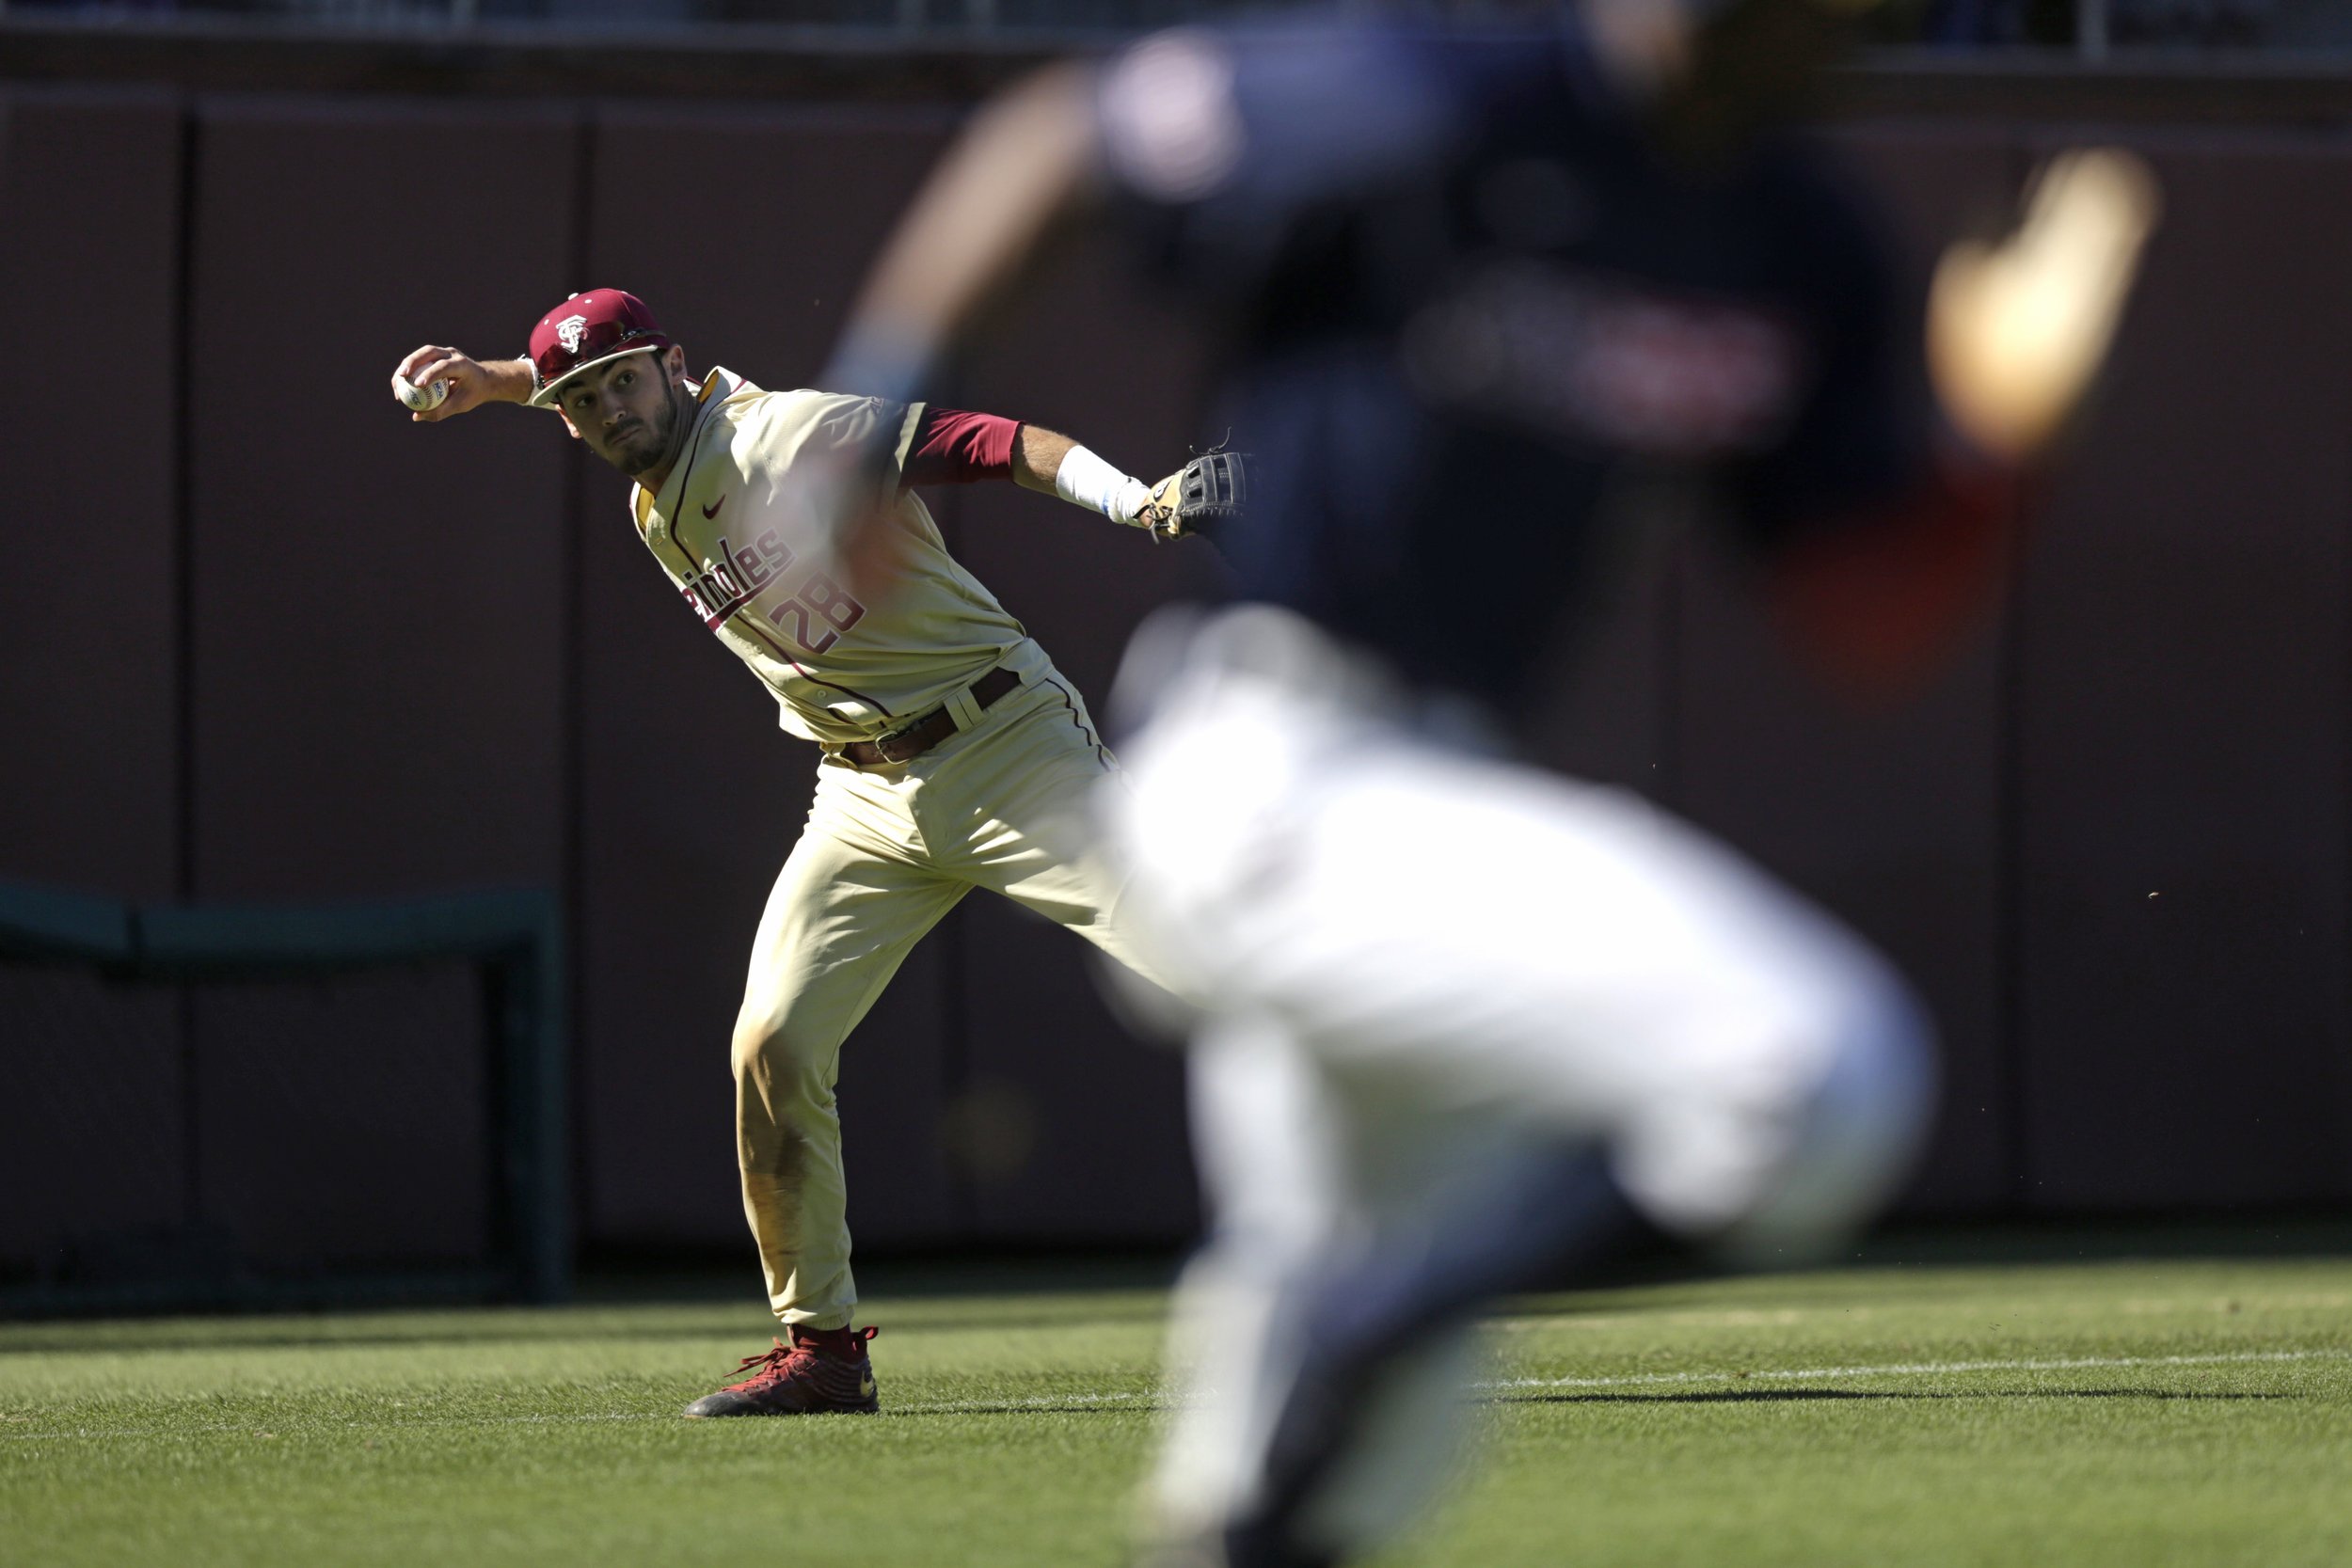  Third baseman Dylan Busby fields the ball during the third game in FSU's series with Samford at the Dick Howser Stadium in Tallahassee, Fla. on Feb 26, 2017. 